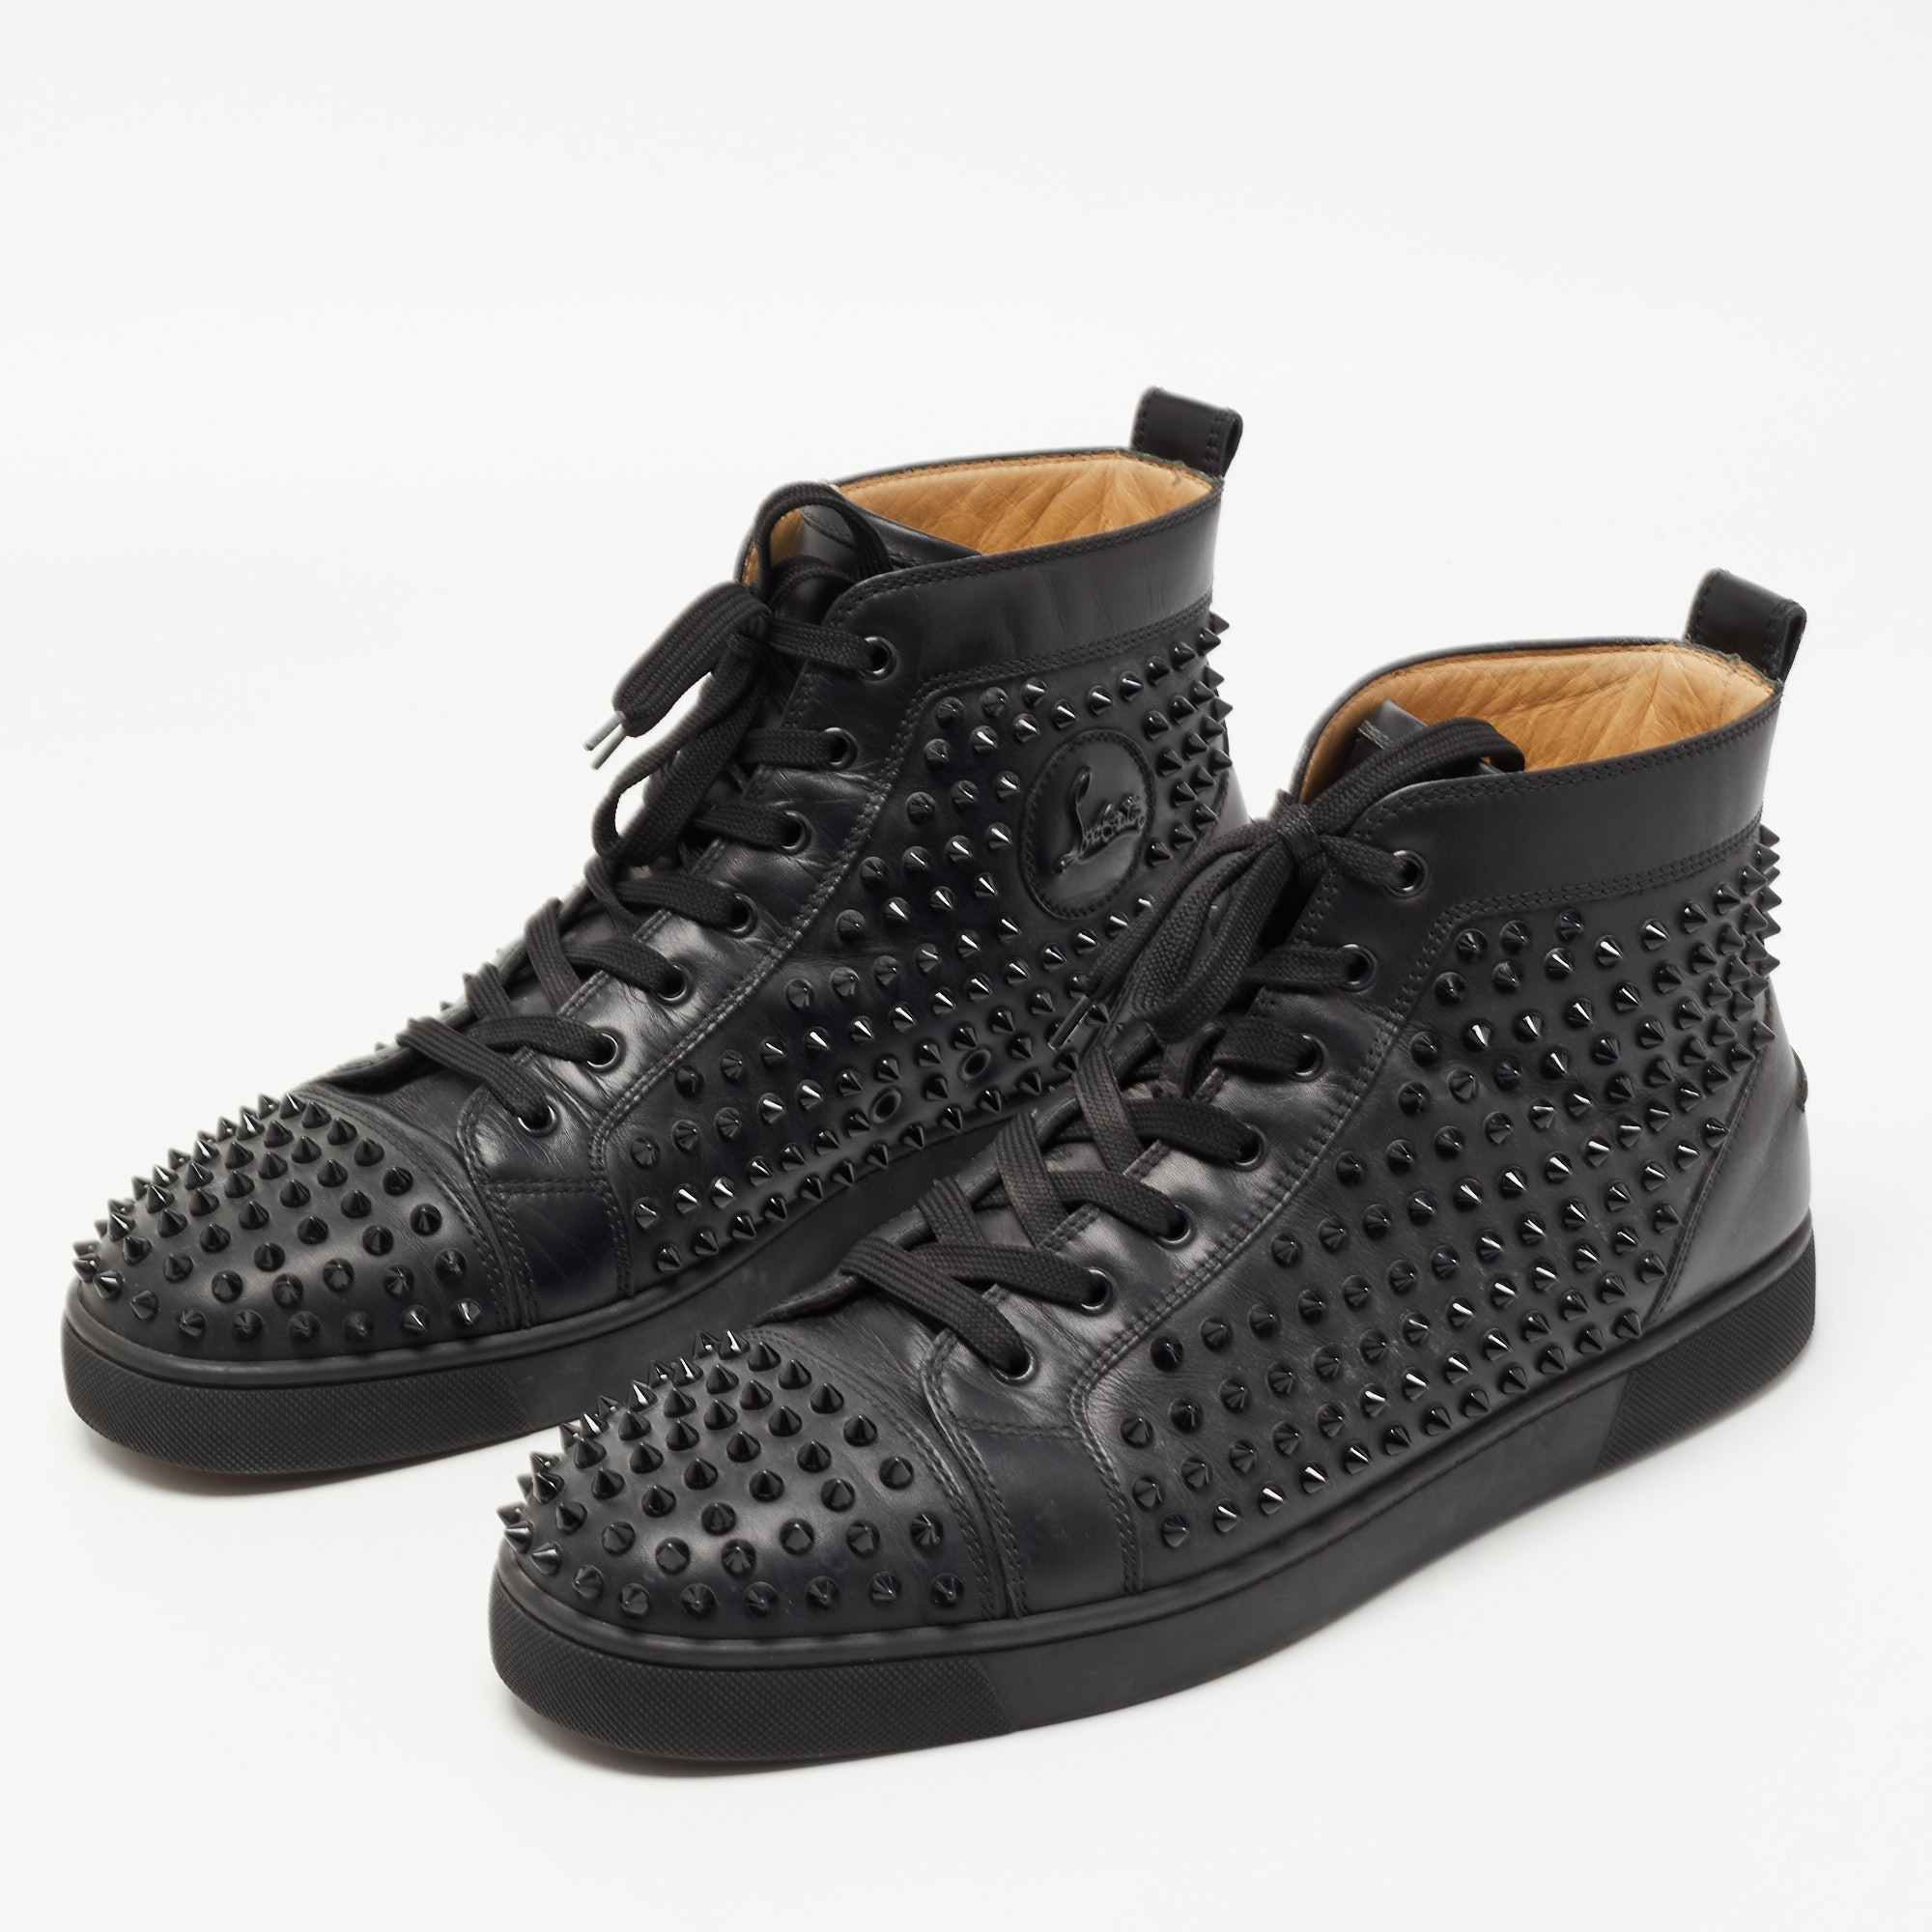 

Christian Louboutin Black Leather Louis Spike High Top Sneakers Size